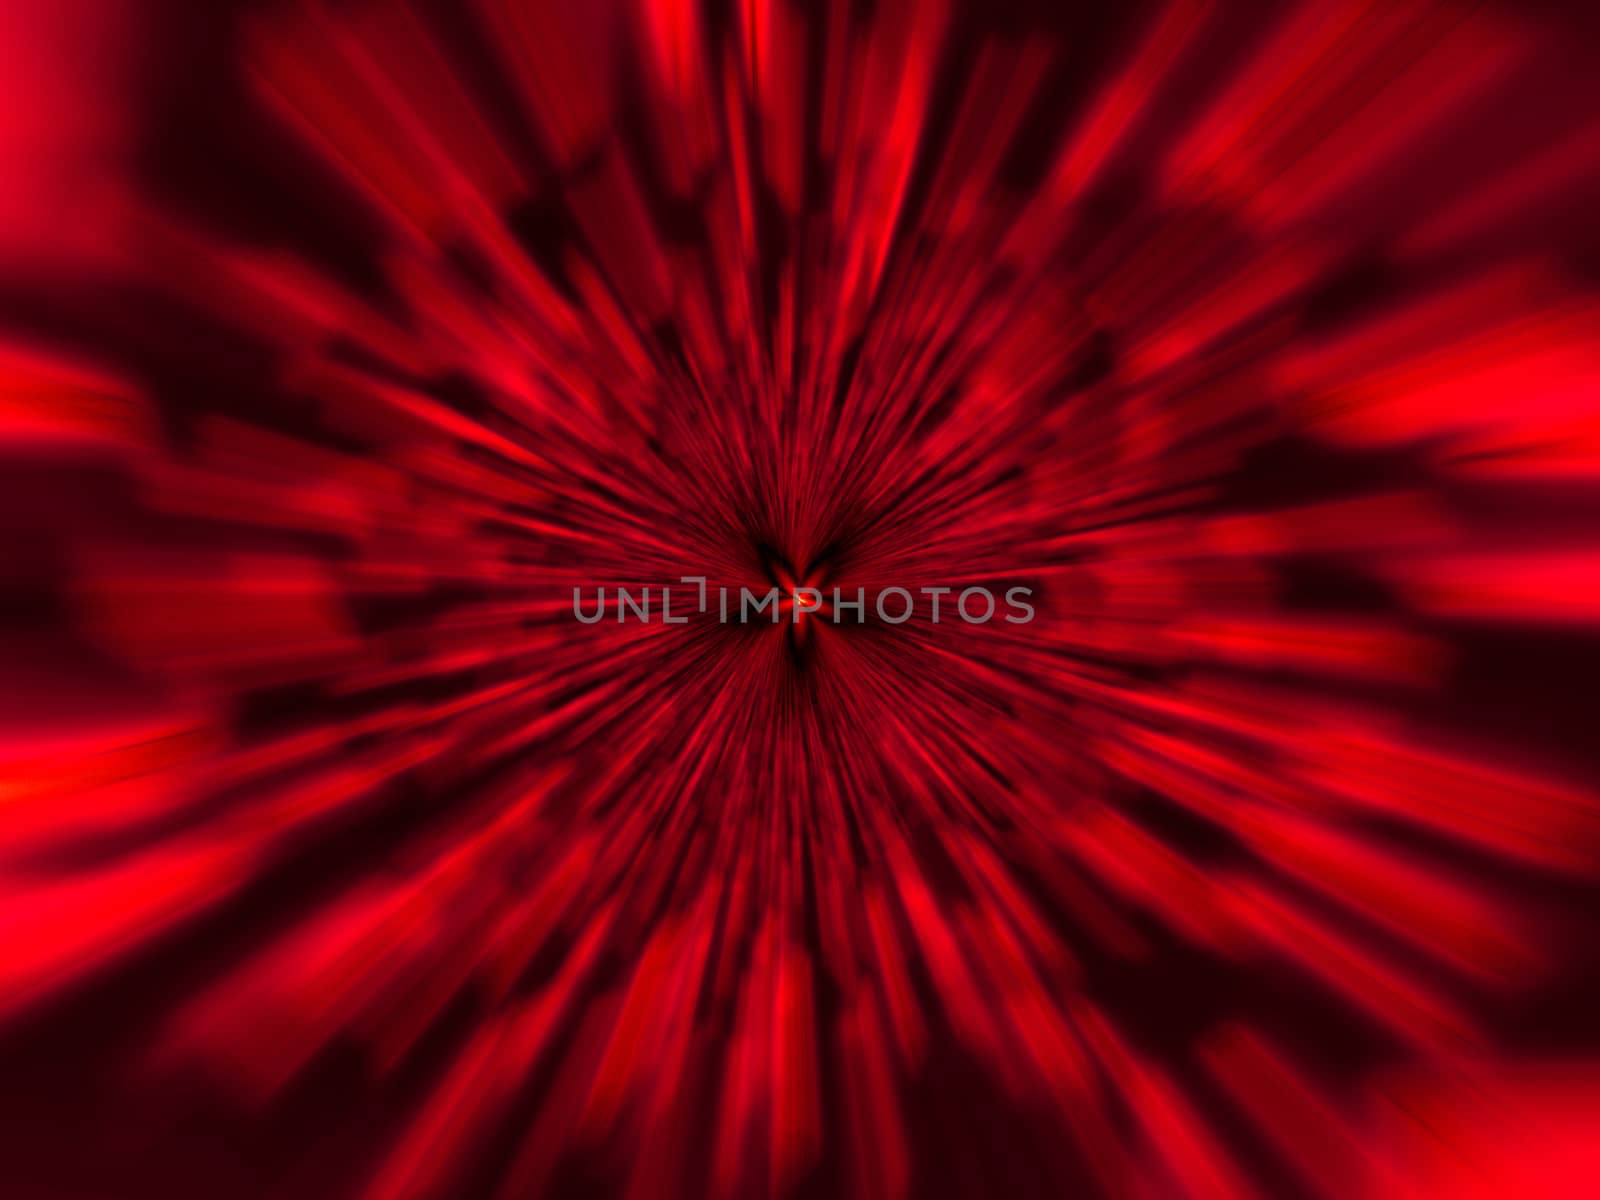 Red warp by bkenney5@gmail.com